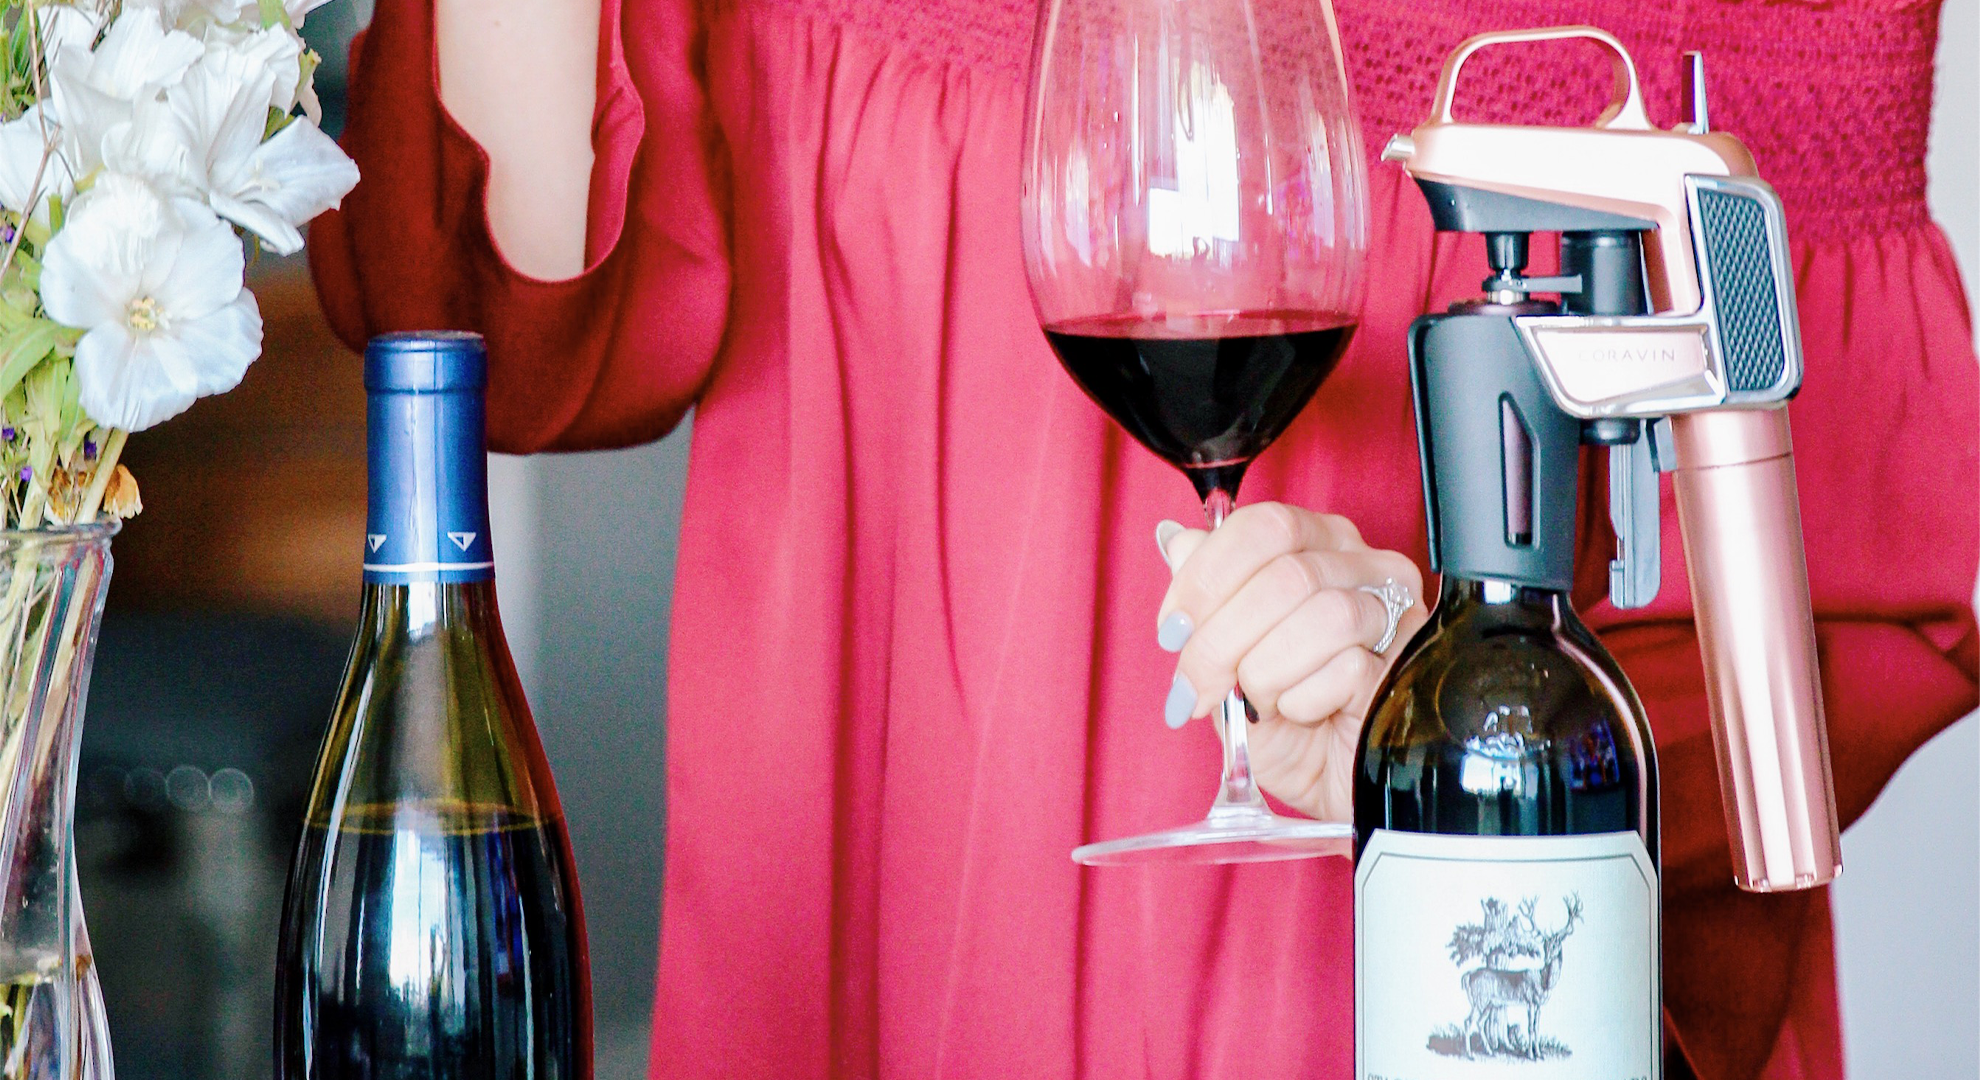 Woman holding a glass of red wine featuring a Coravin Wine Preservation System on bottle.